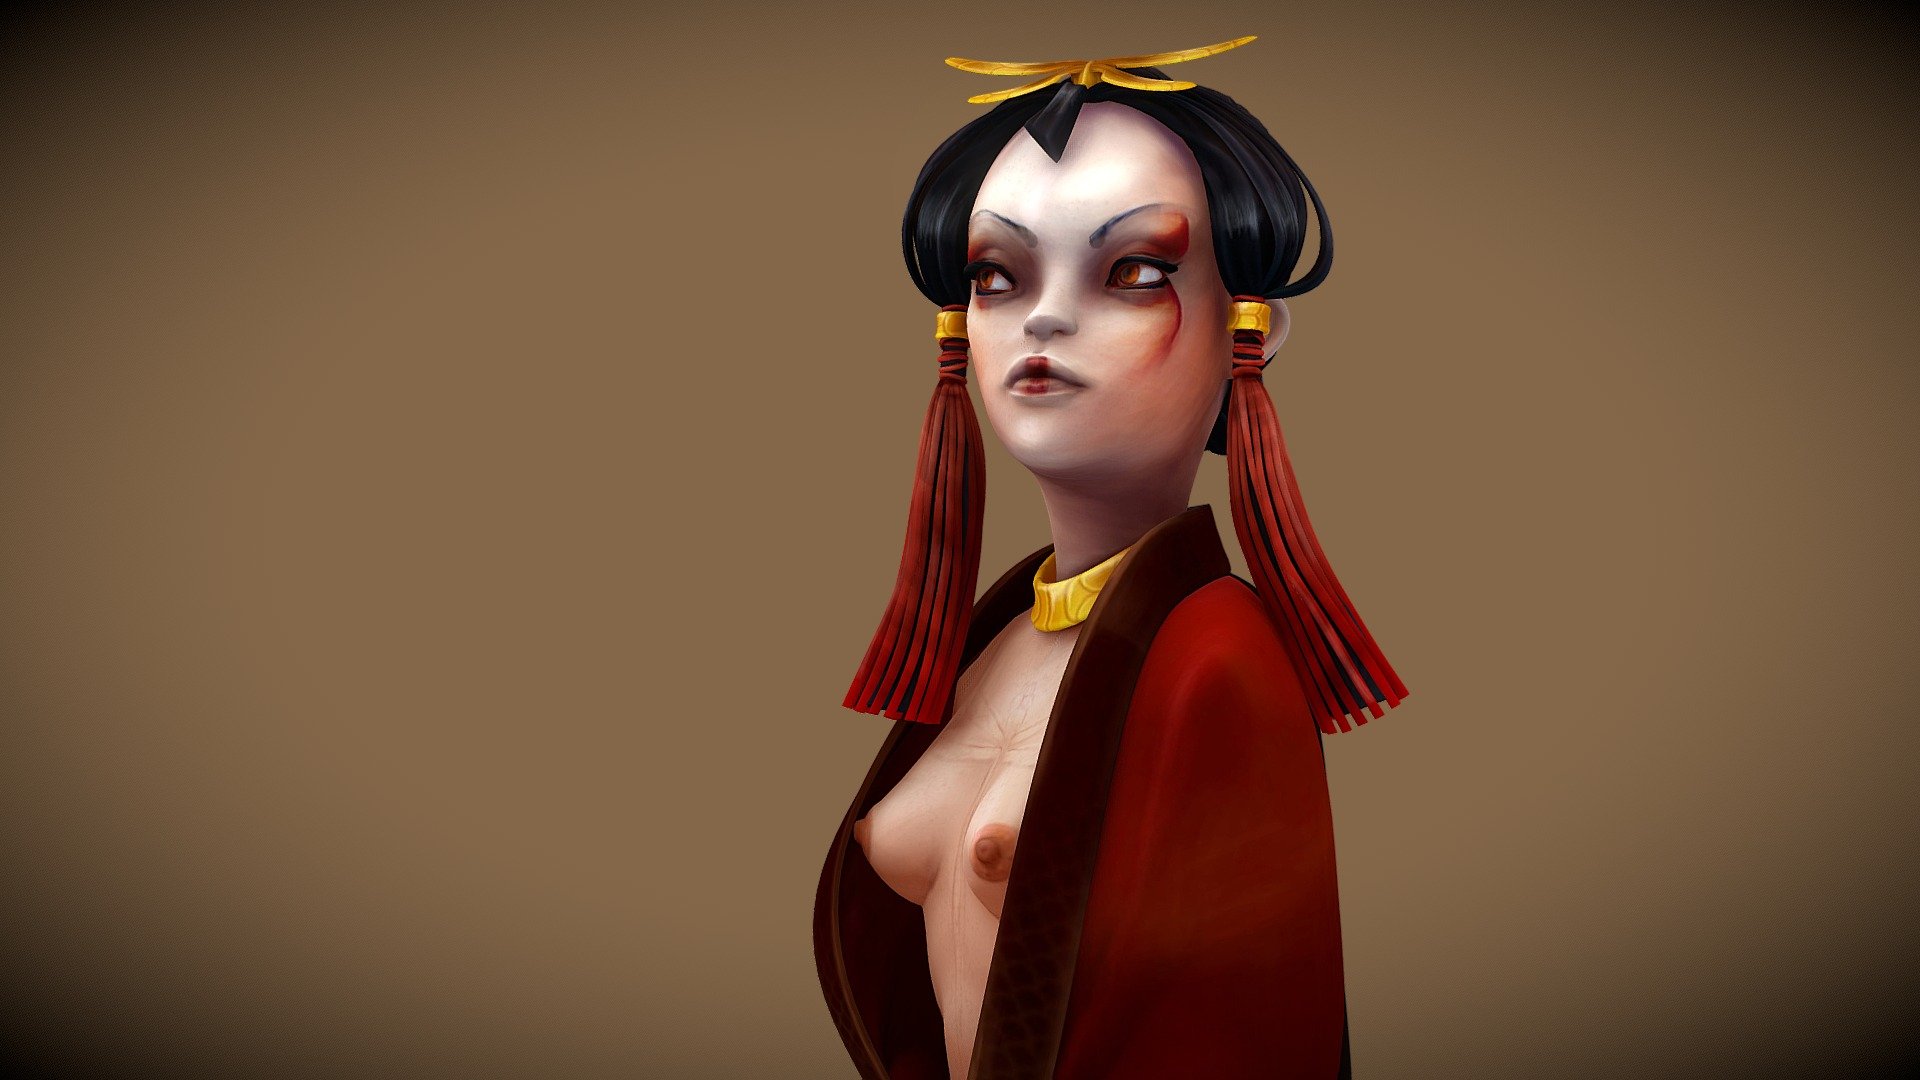 My entry for the #3dBustChallenge by Yekaterina Bourykina.
I wanted to create an evil geisha character. Based on my own concept. I used zbrush sculpt as base. Painted in Substance Painter - Dragonfly Queen - 3D model by weronika.p (@weronika.p77) 3d model